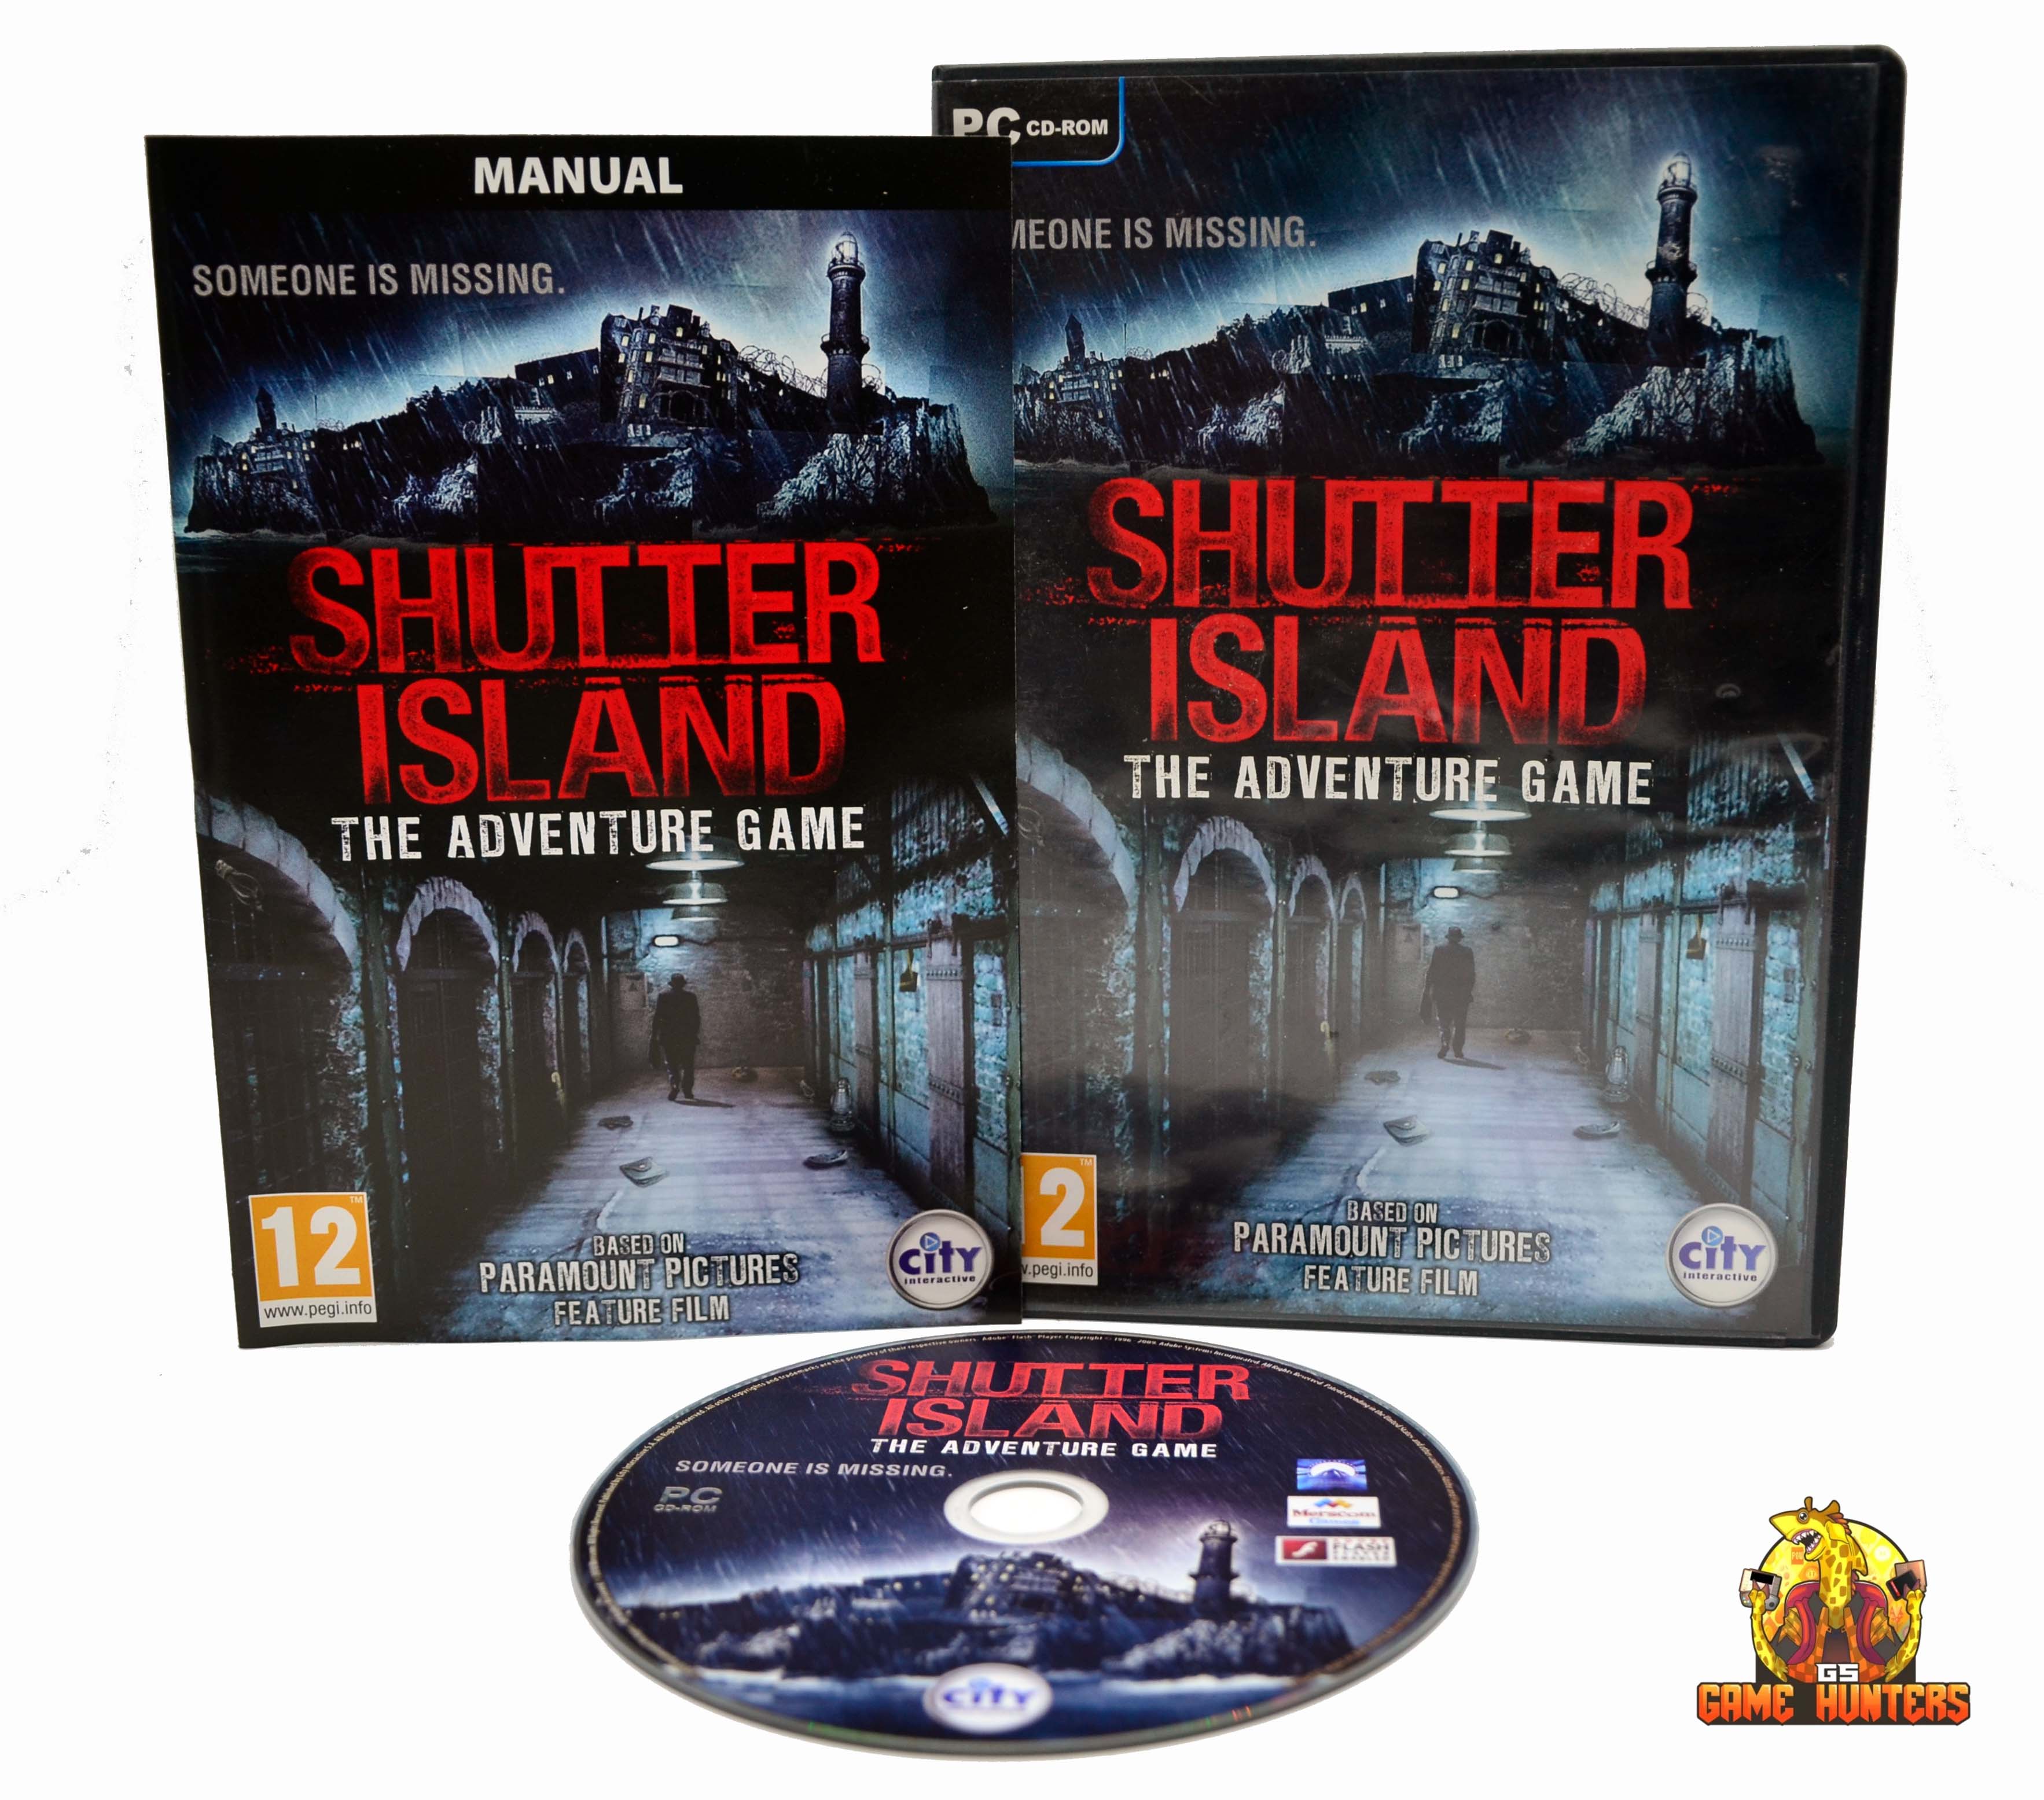 Shutter Island The Adventure Game Case, Manual & Disc.jpg  by GSGAMEHUNTERS